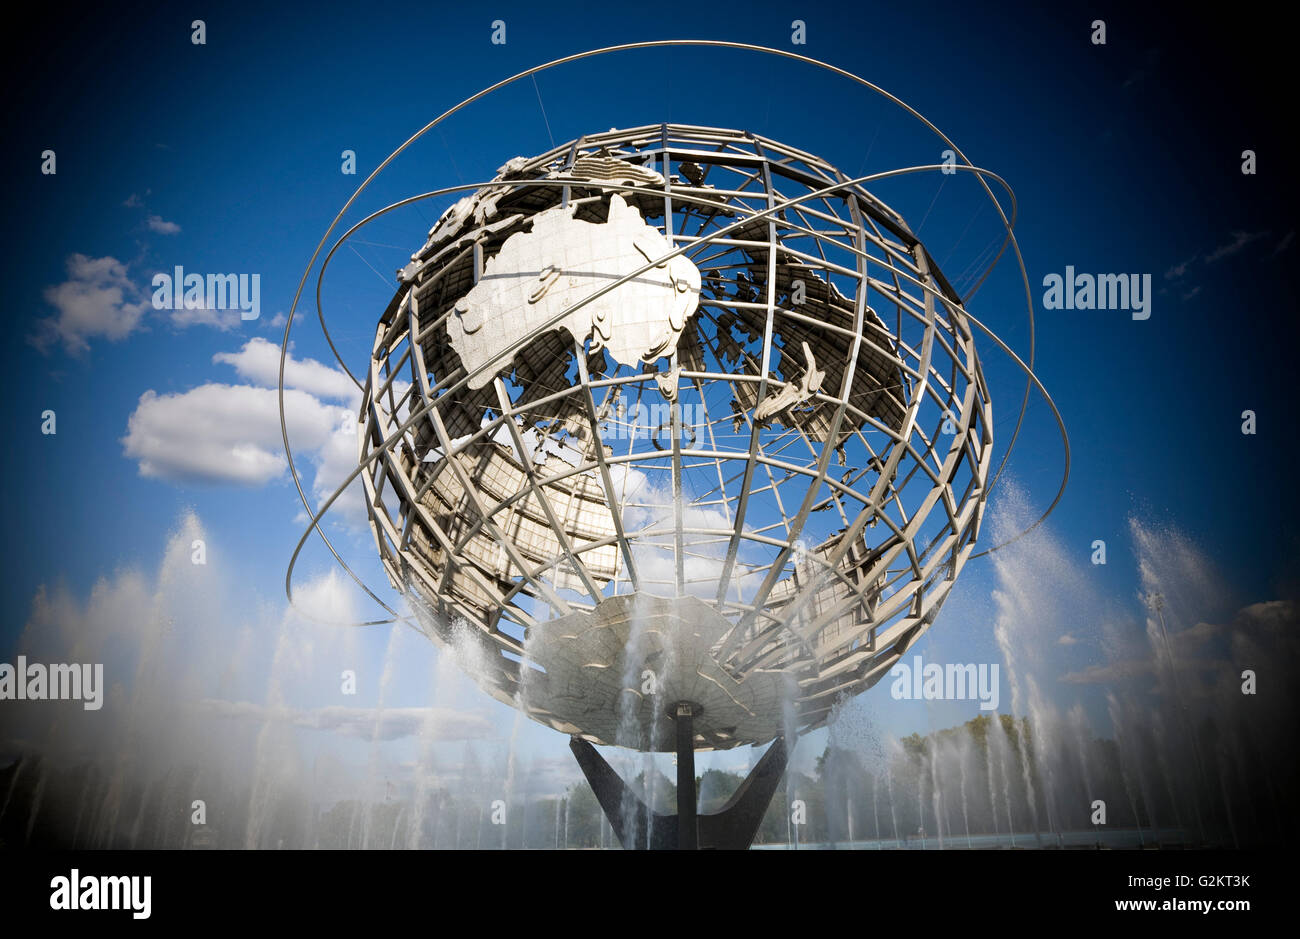 Unisphere Sculpture, Low Angle View, Flushing Meadows-Corona Park, Queens, New York City, USA Stock Photo